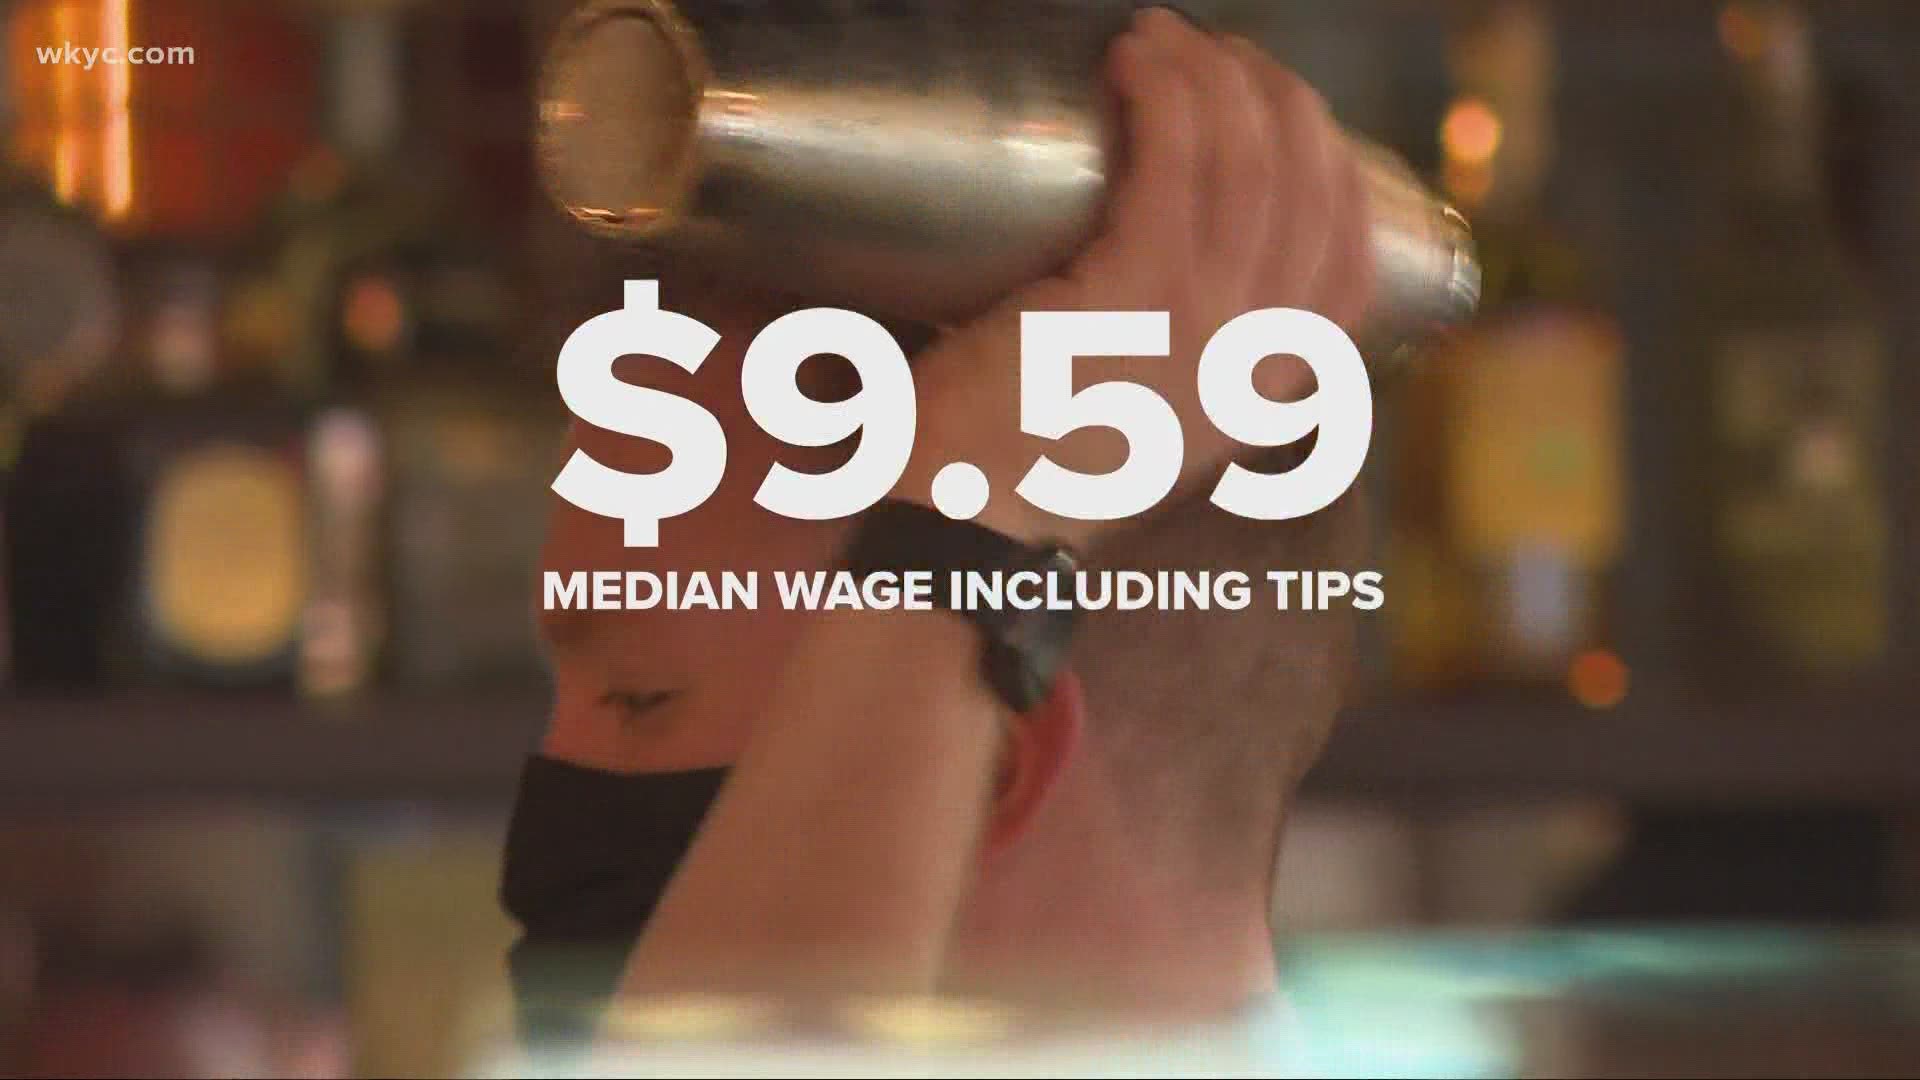 In the last month we've heard from restaurant operators who have told us how difficult it has been to find workers. But workers say there's more to the struggle.